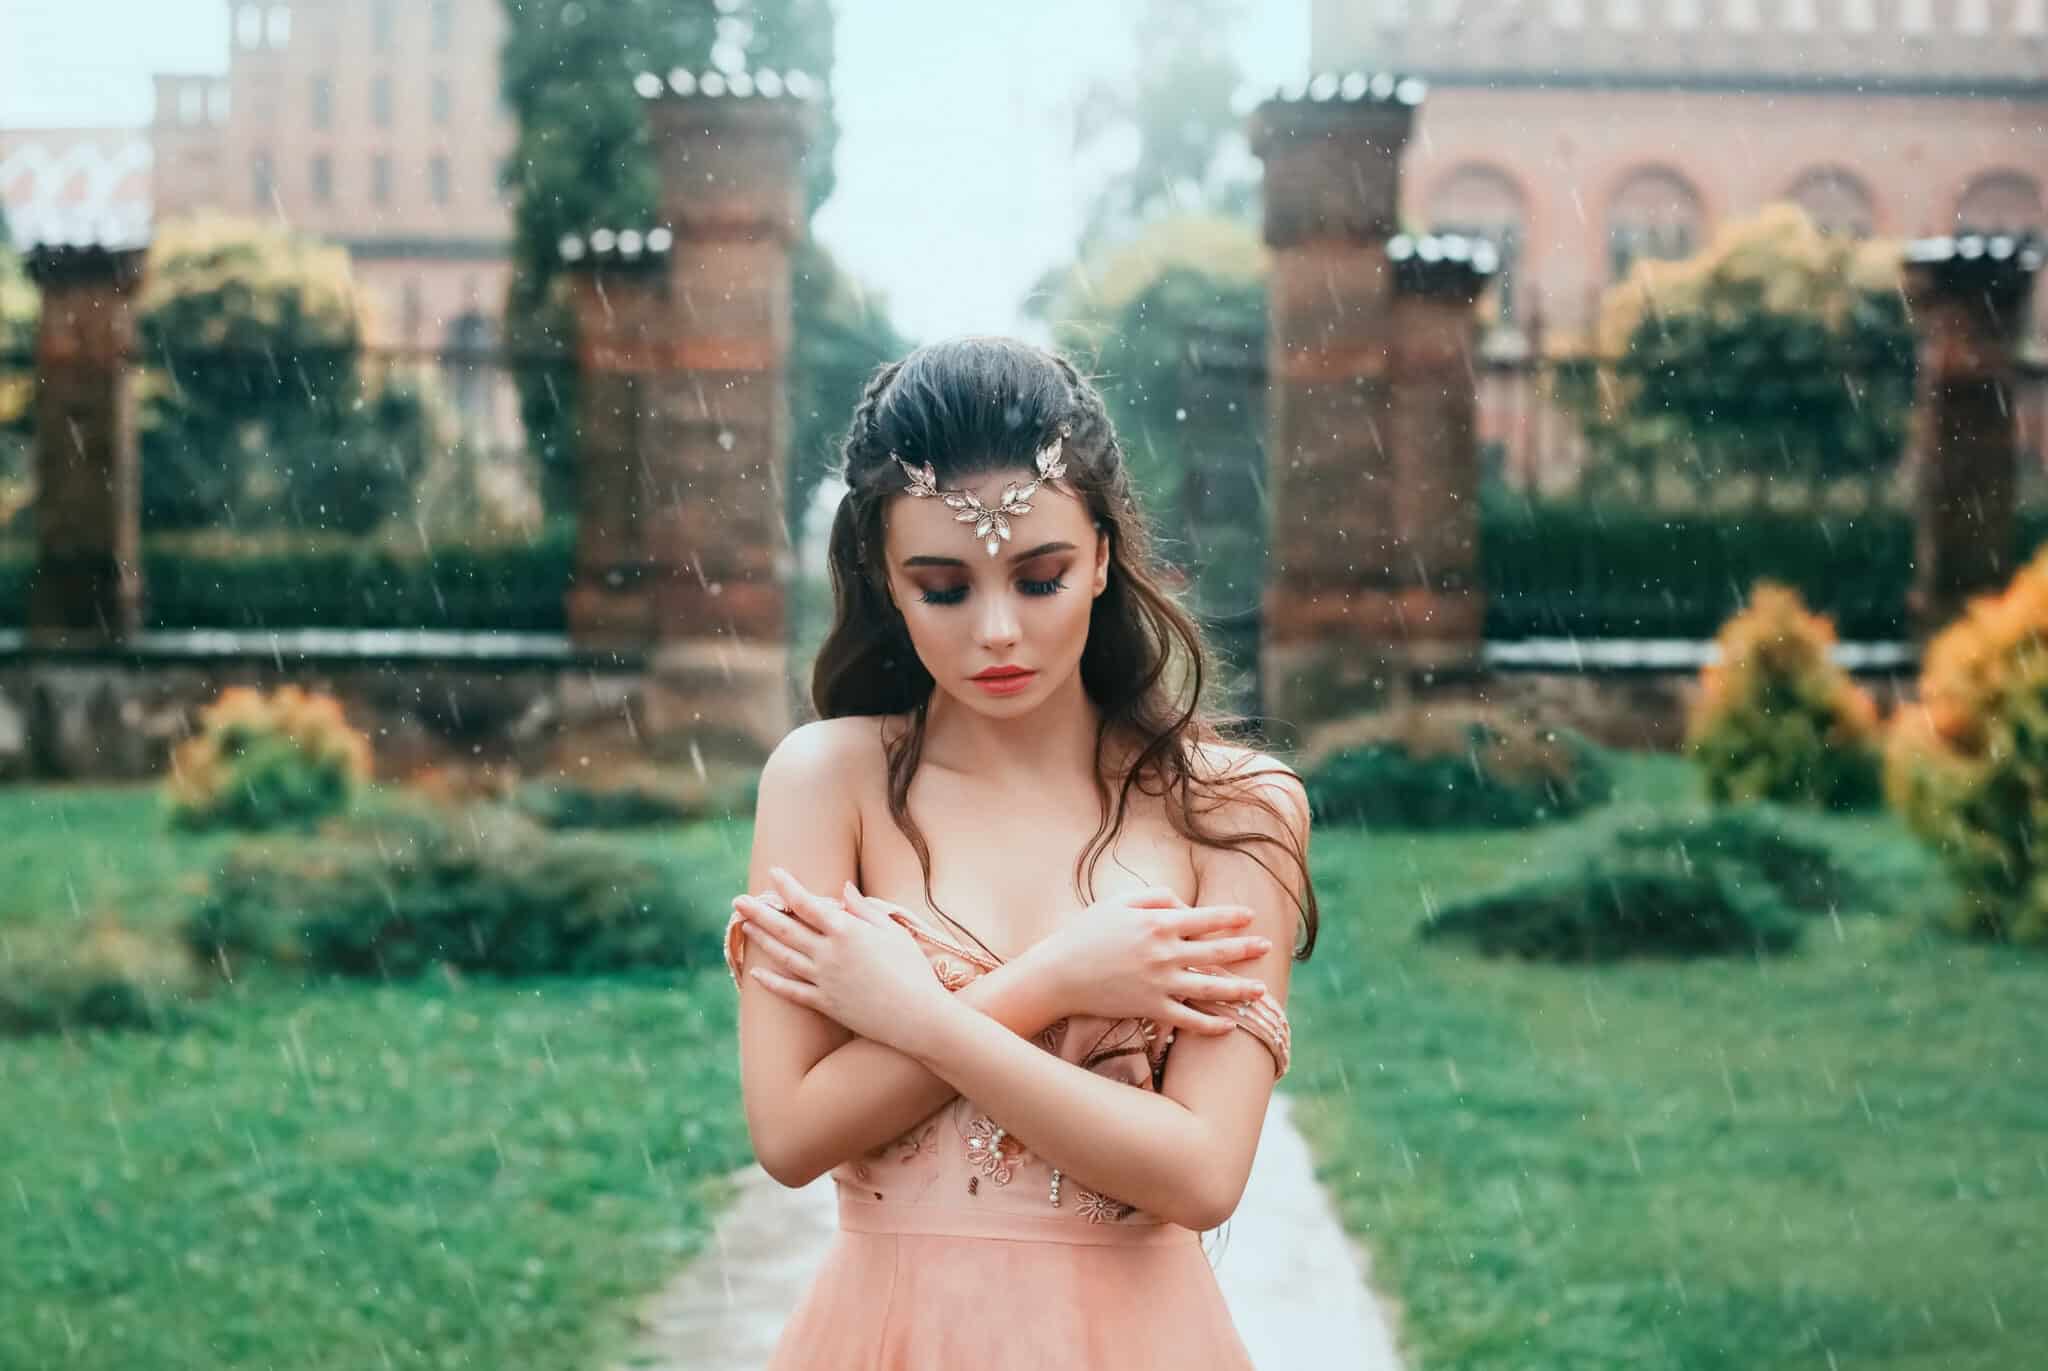 Attractive brunette girl with a cute angel face standing in the rain under the open sky. 